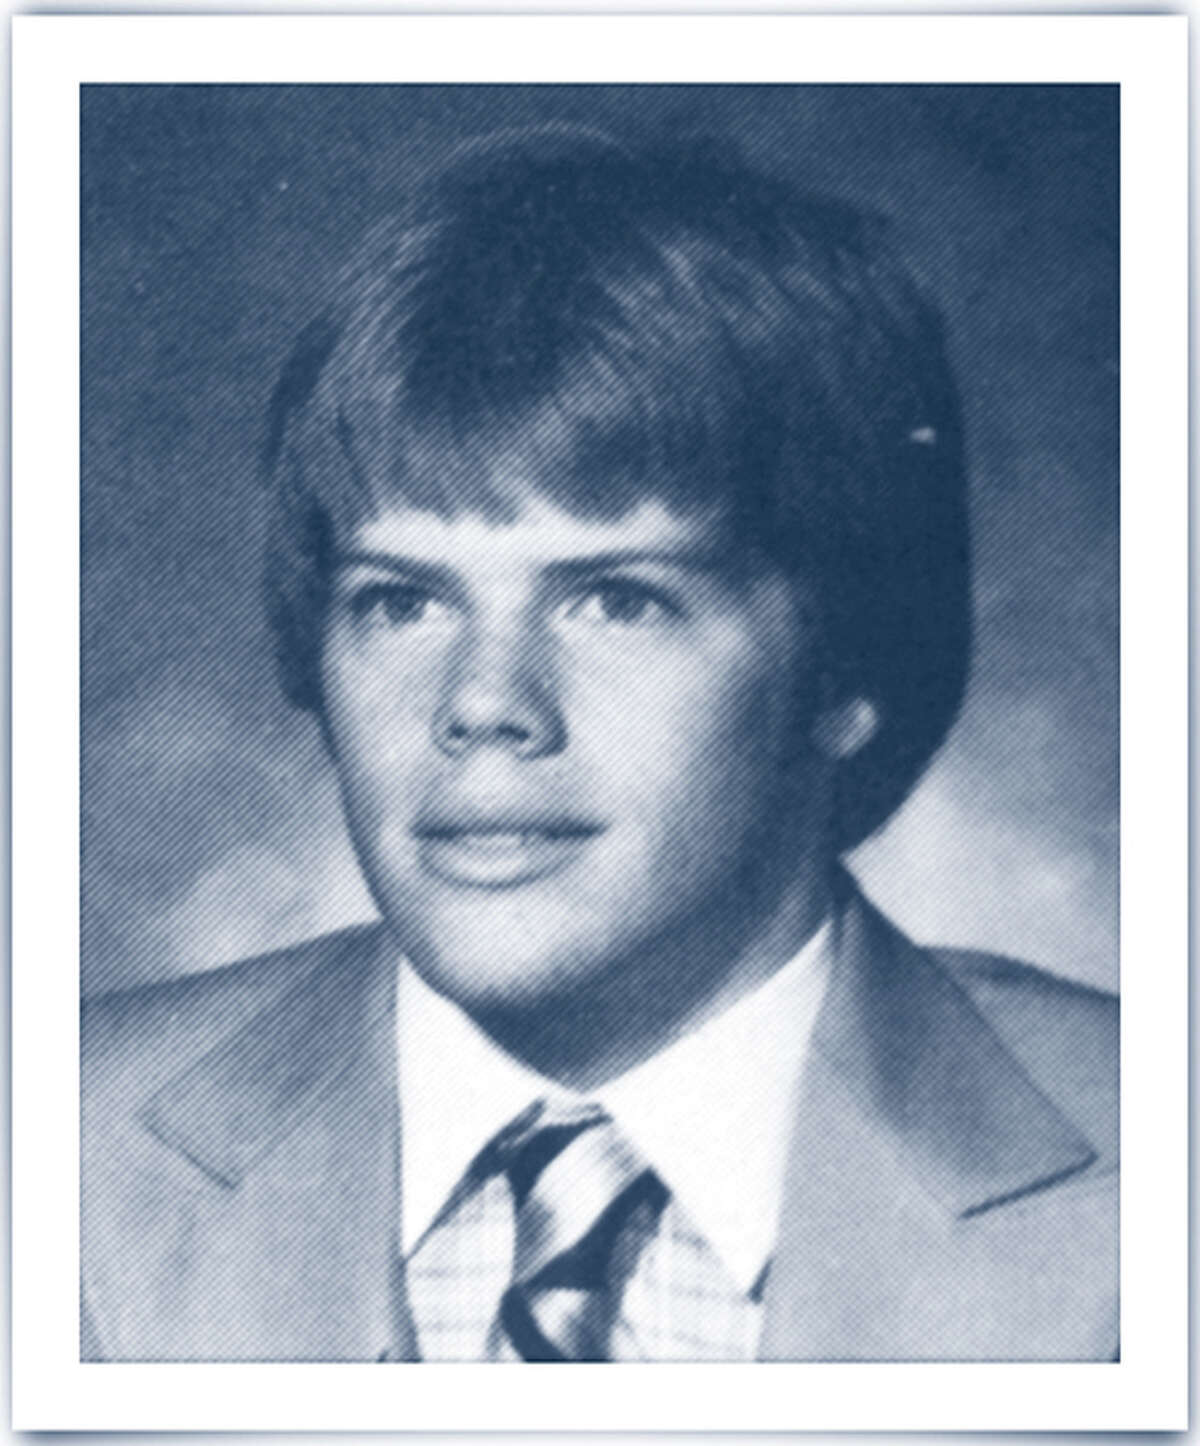 Patrick Davis, seen here in his 1980 yearbook photo, was a popular football player at Lee High before the wreck that left him with brain damage.